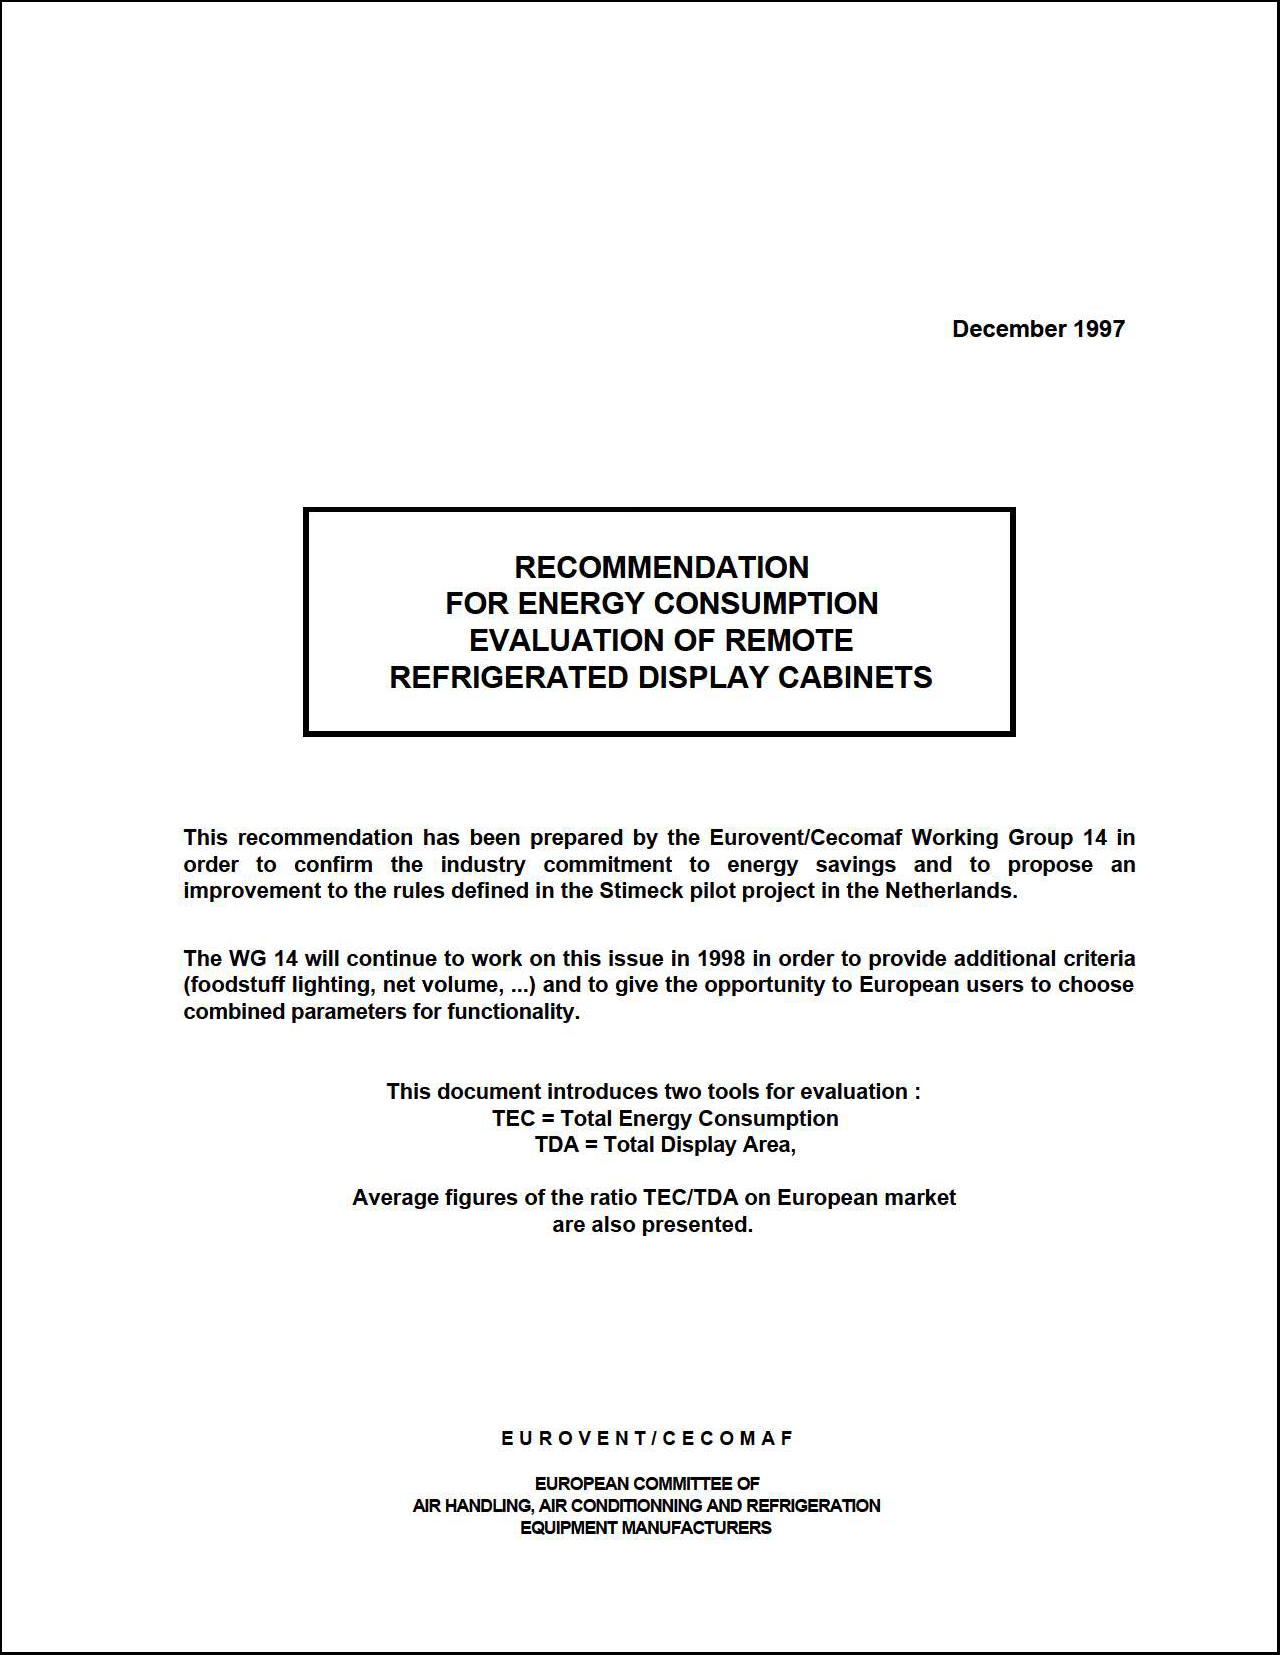 1997 - Energy consumption evaluation of remote refigerated display cabinets